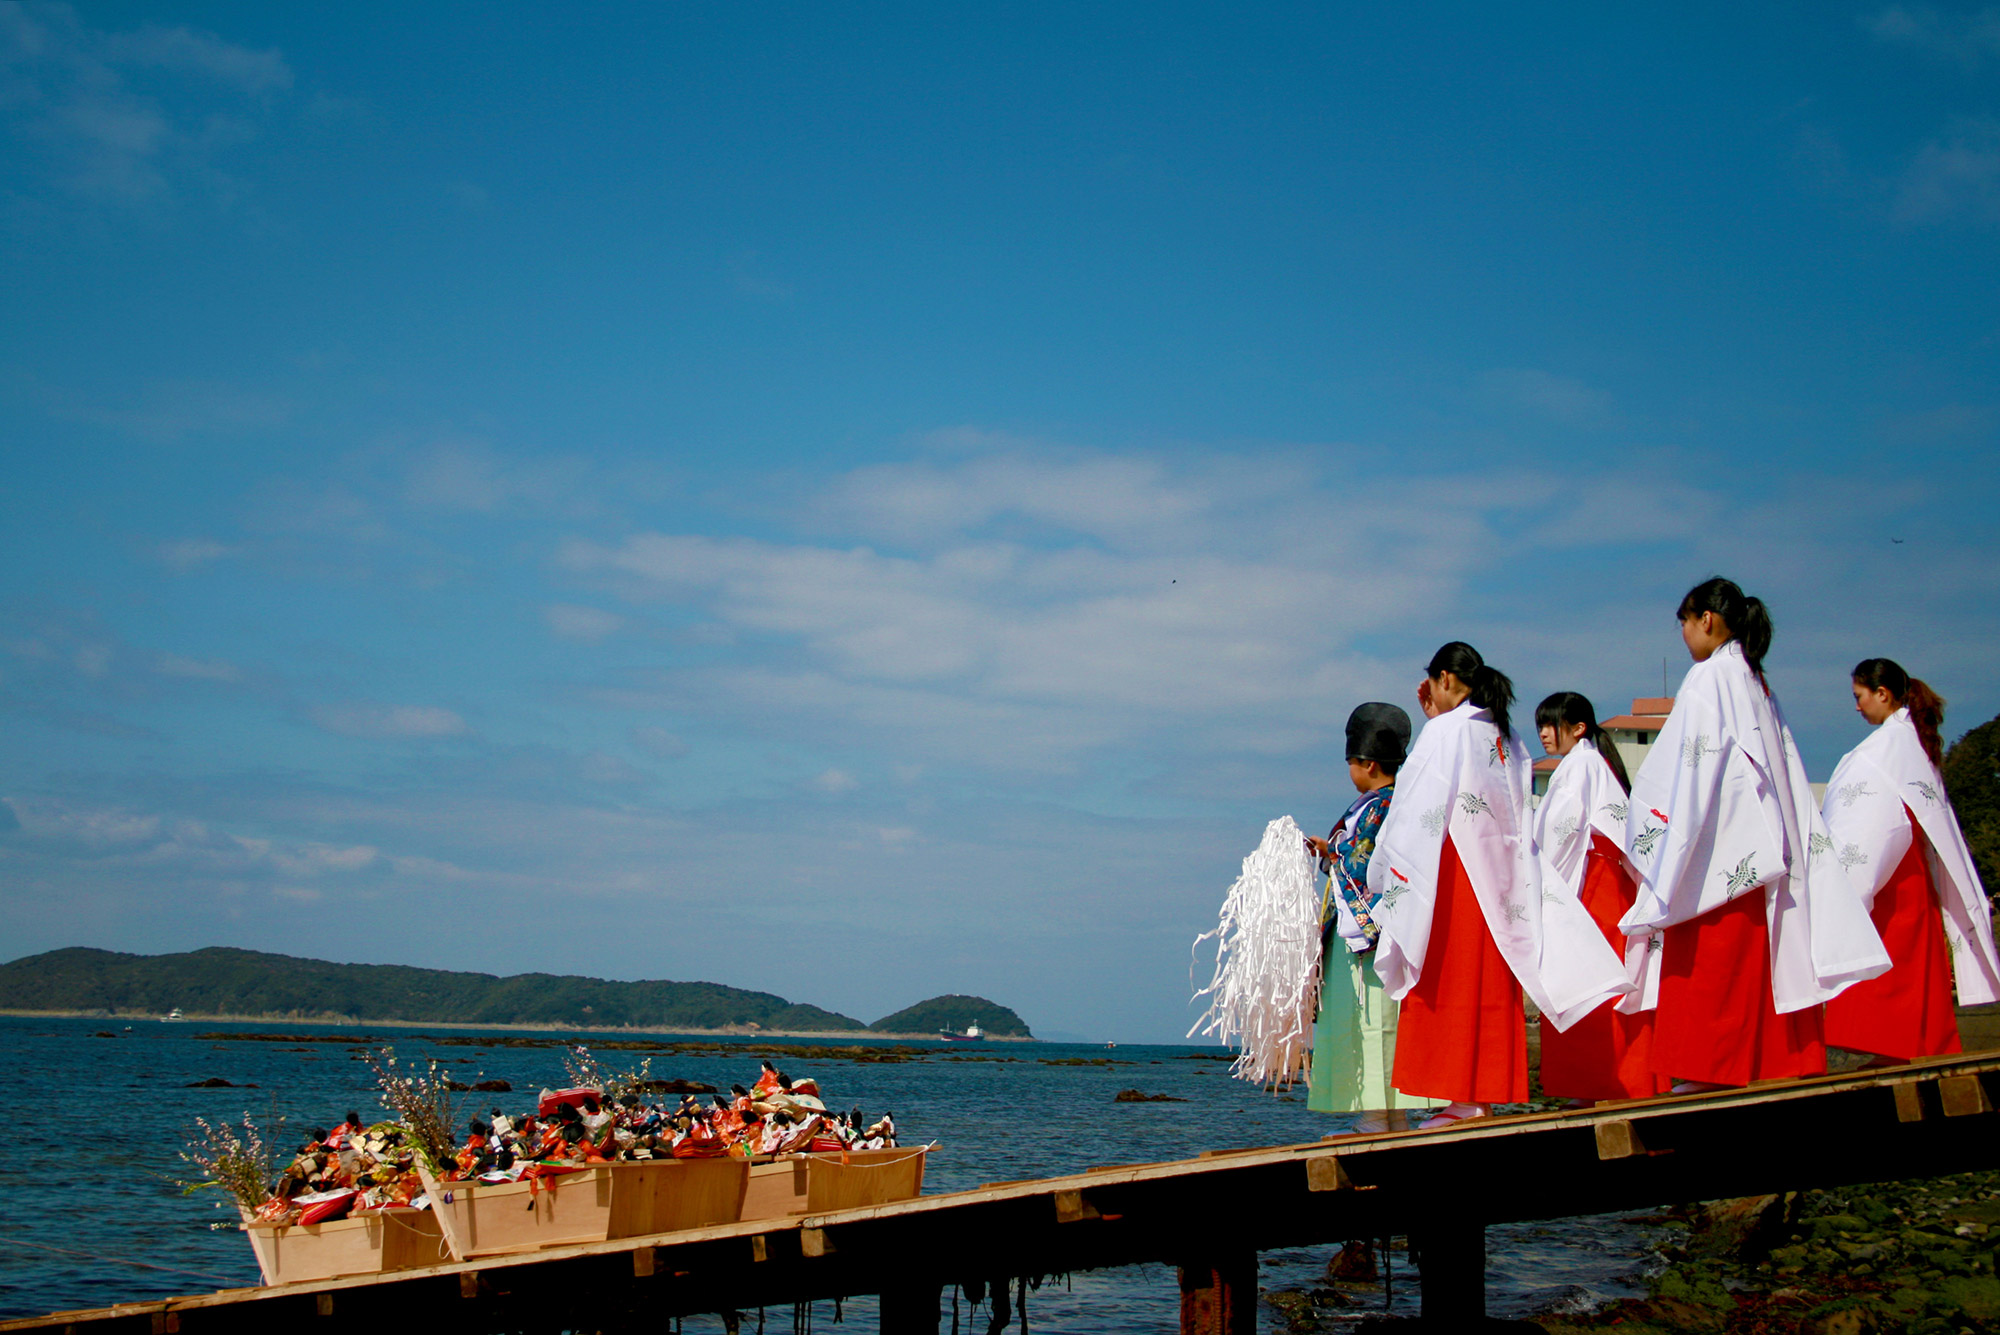 Hina dolls are carried on board by a shipの写真